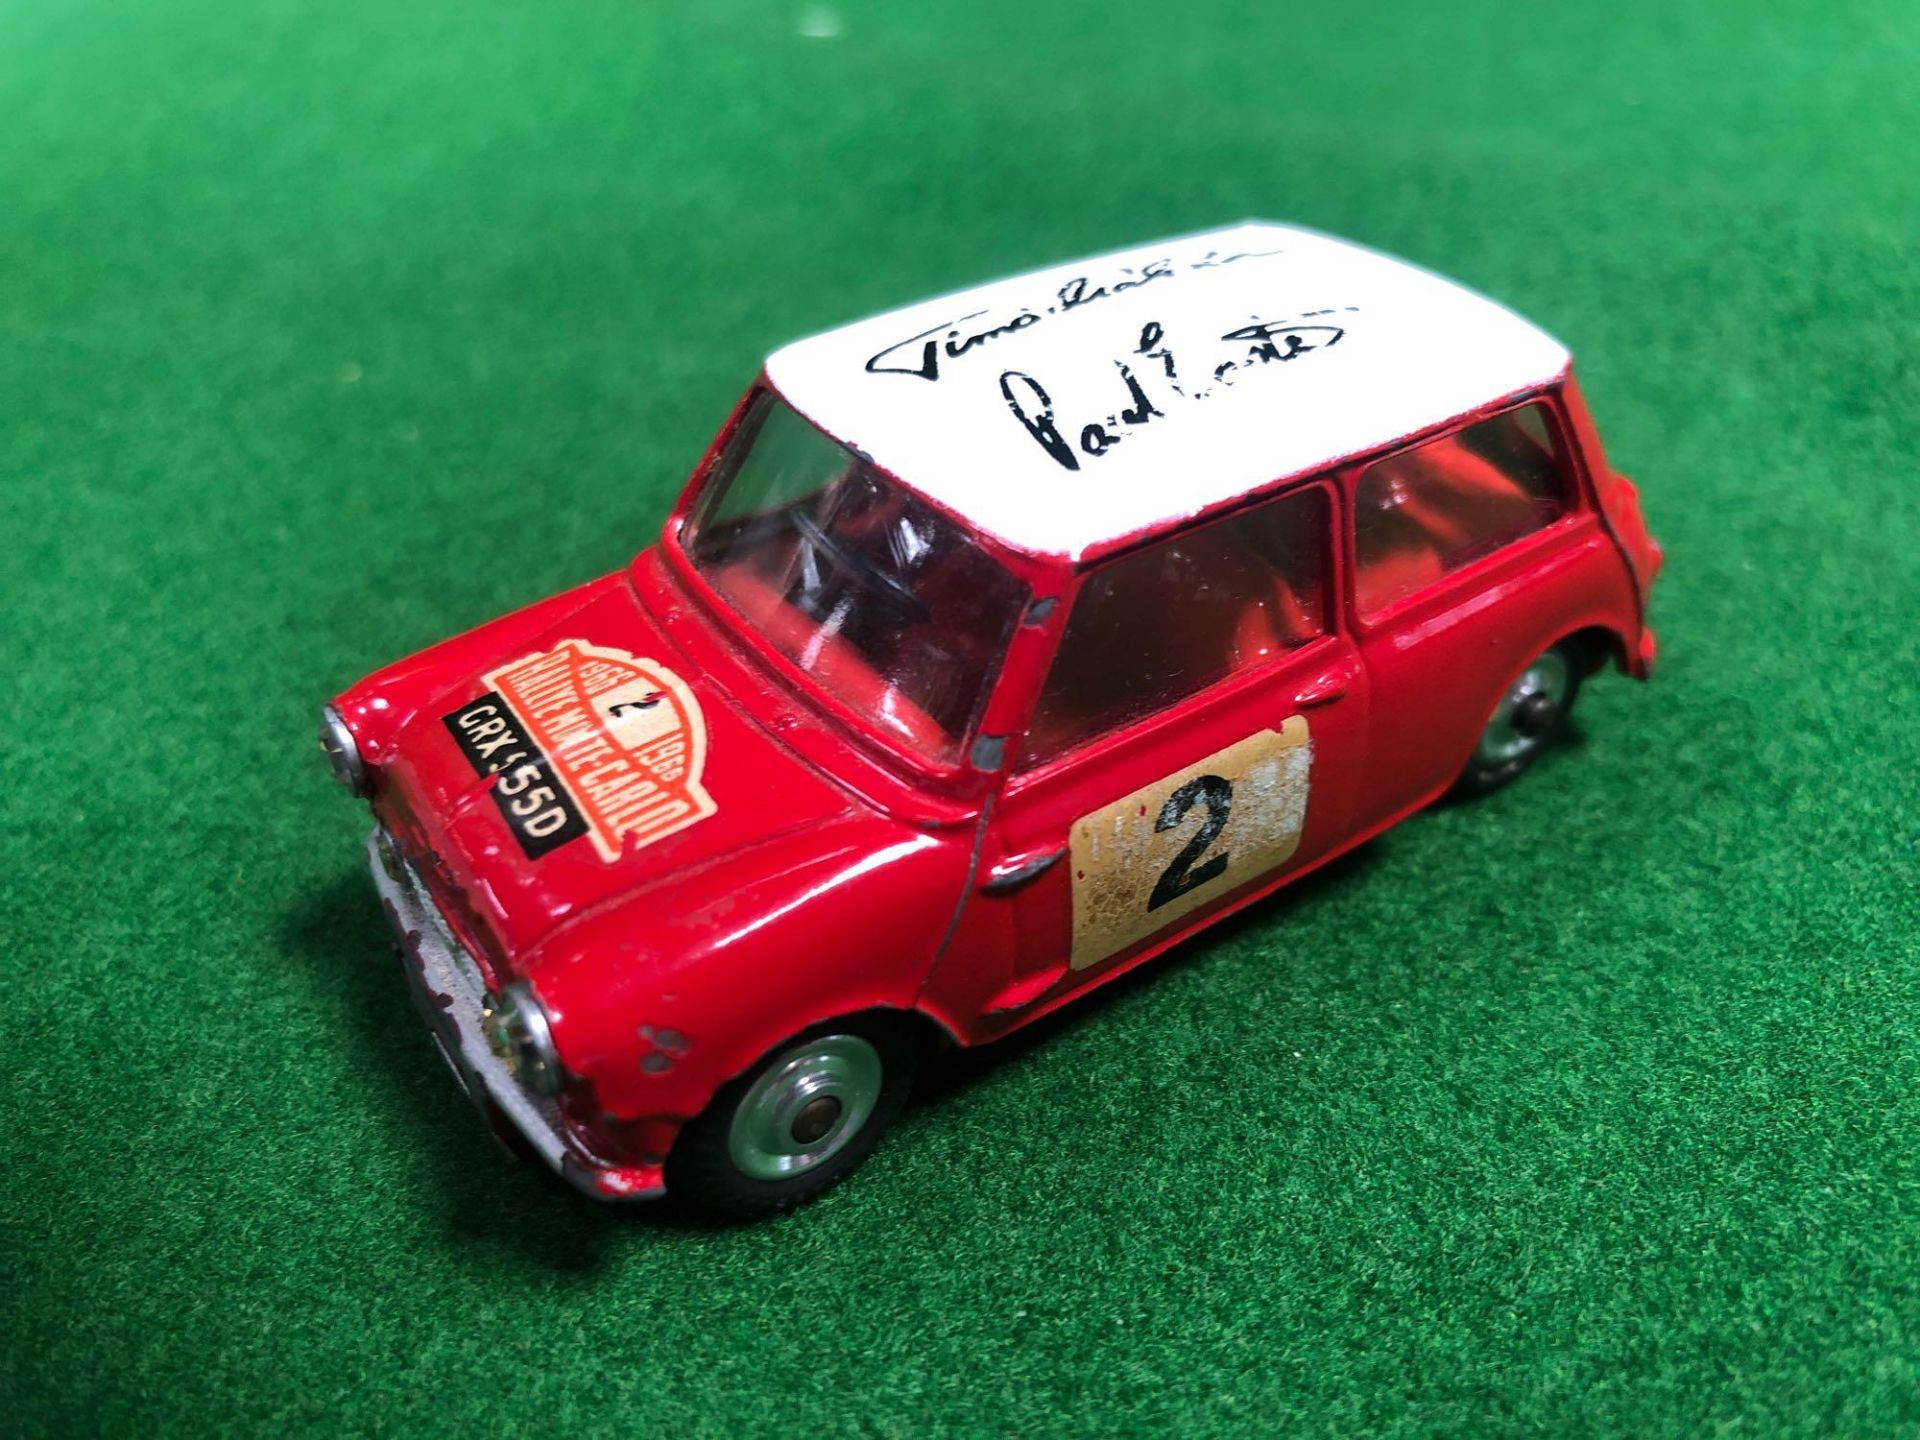 Corgi 321 Diecast BMC Mini Cooper S Monte Carlo Rally Car In Red With White Roof With Racing - Image 2 of 3